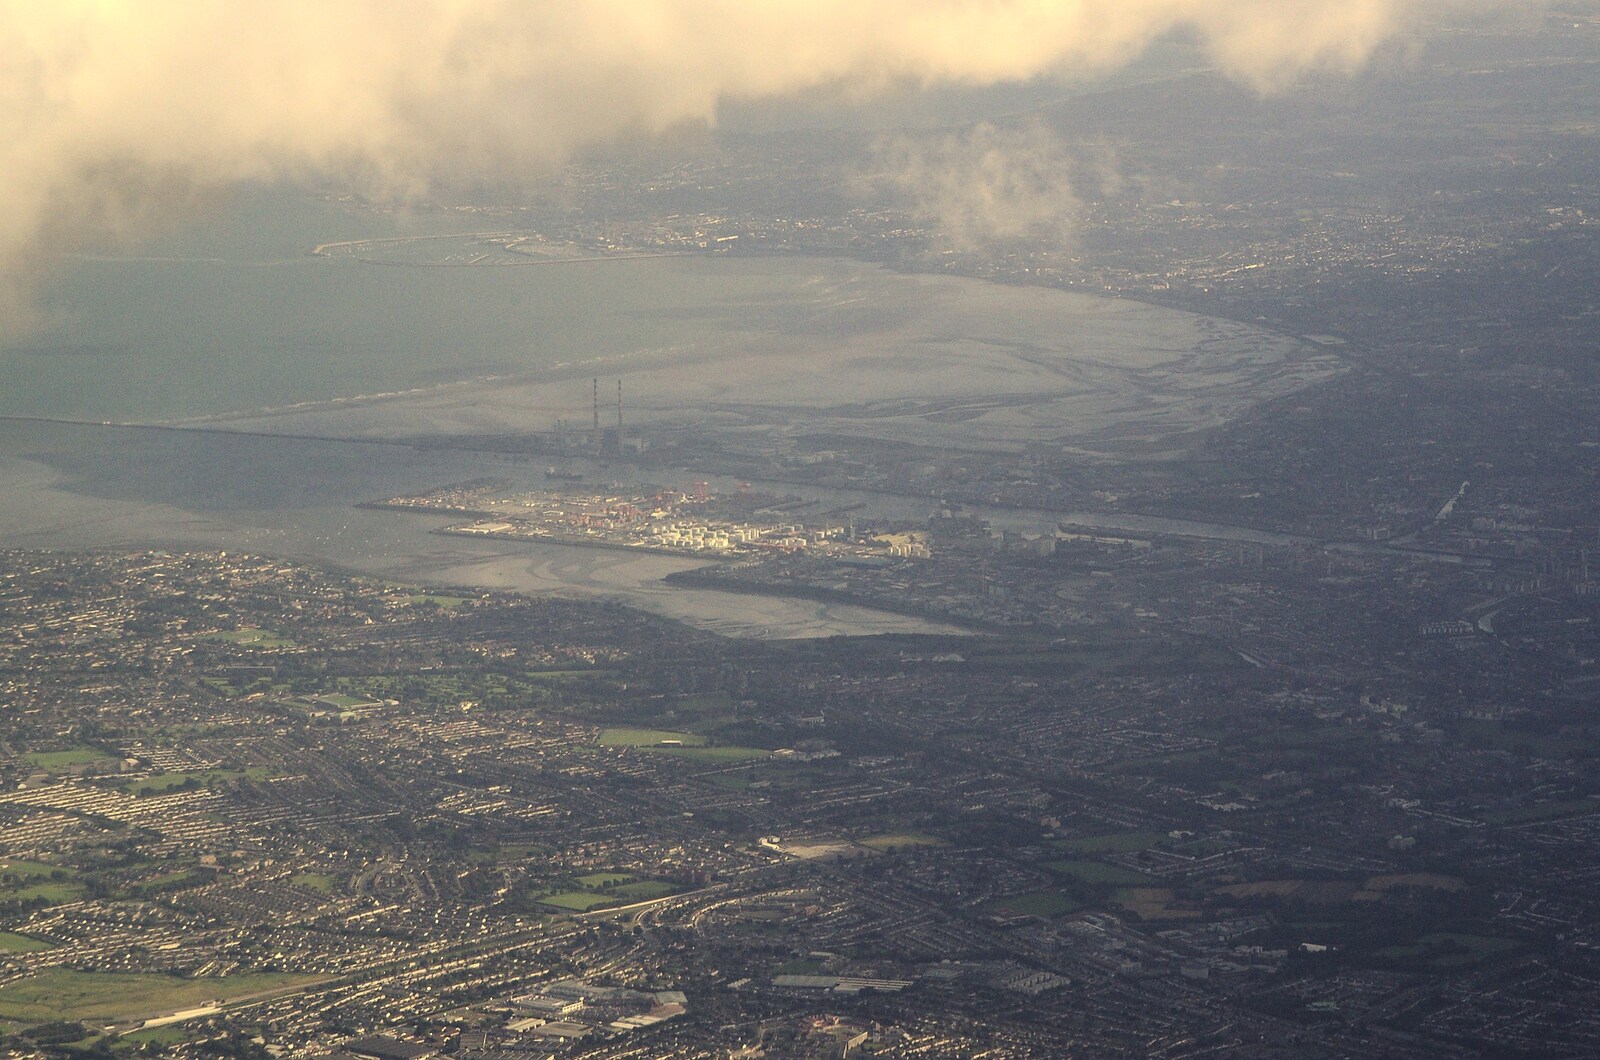 Blackrock and Dublin, Ireland - 24th September 2007: Dublin Bay and the Winkies seen from the air